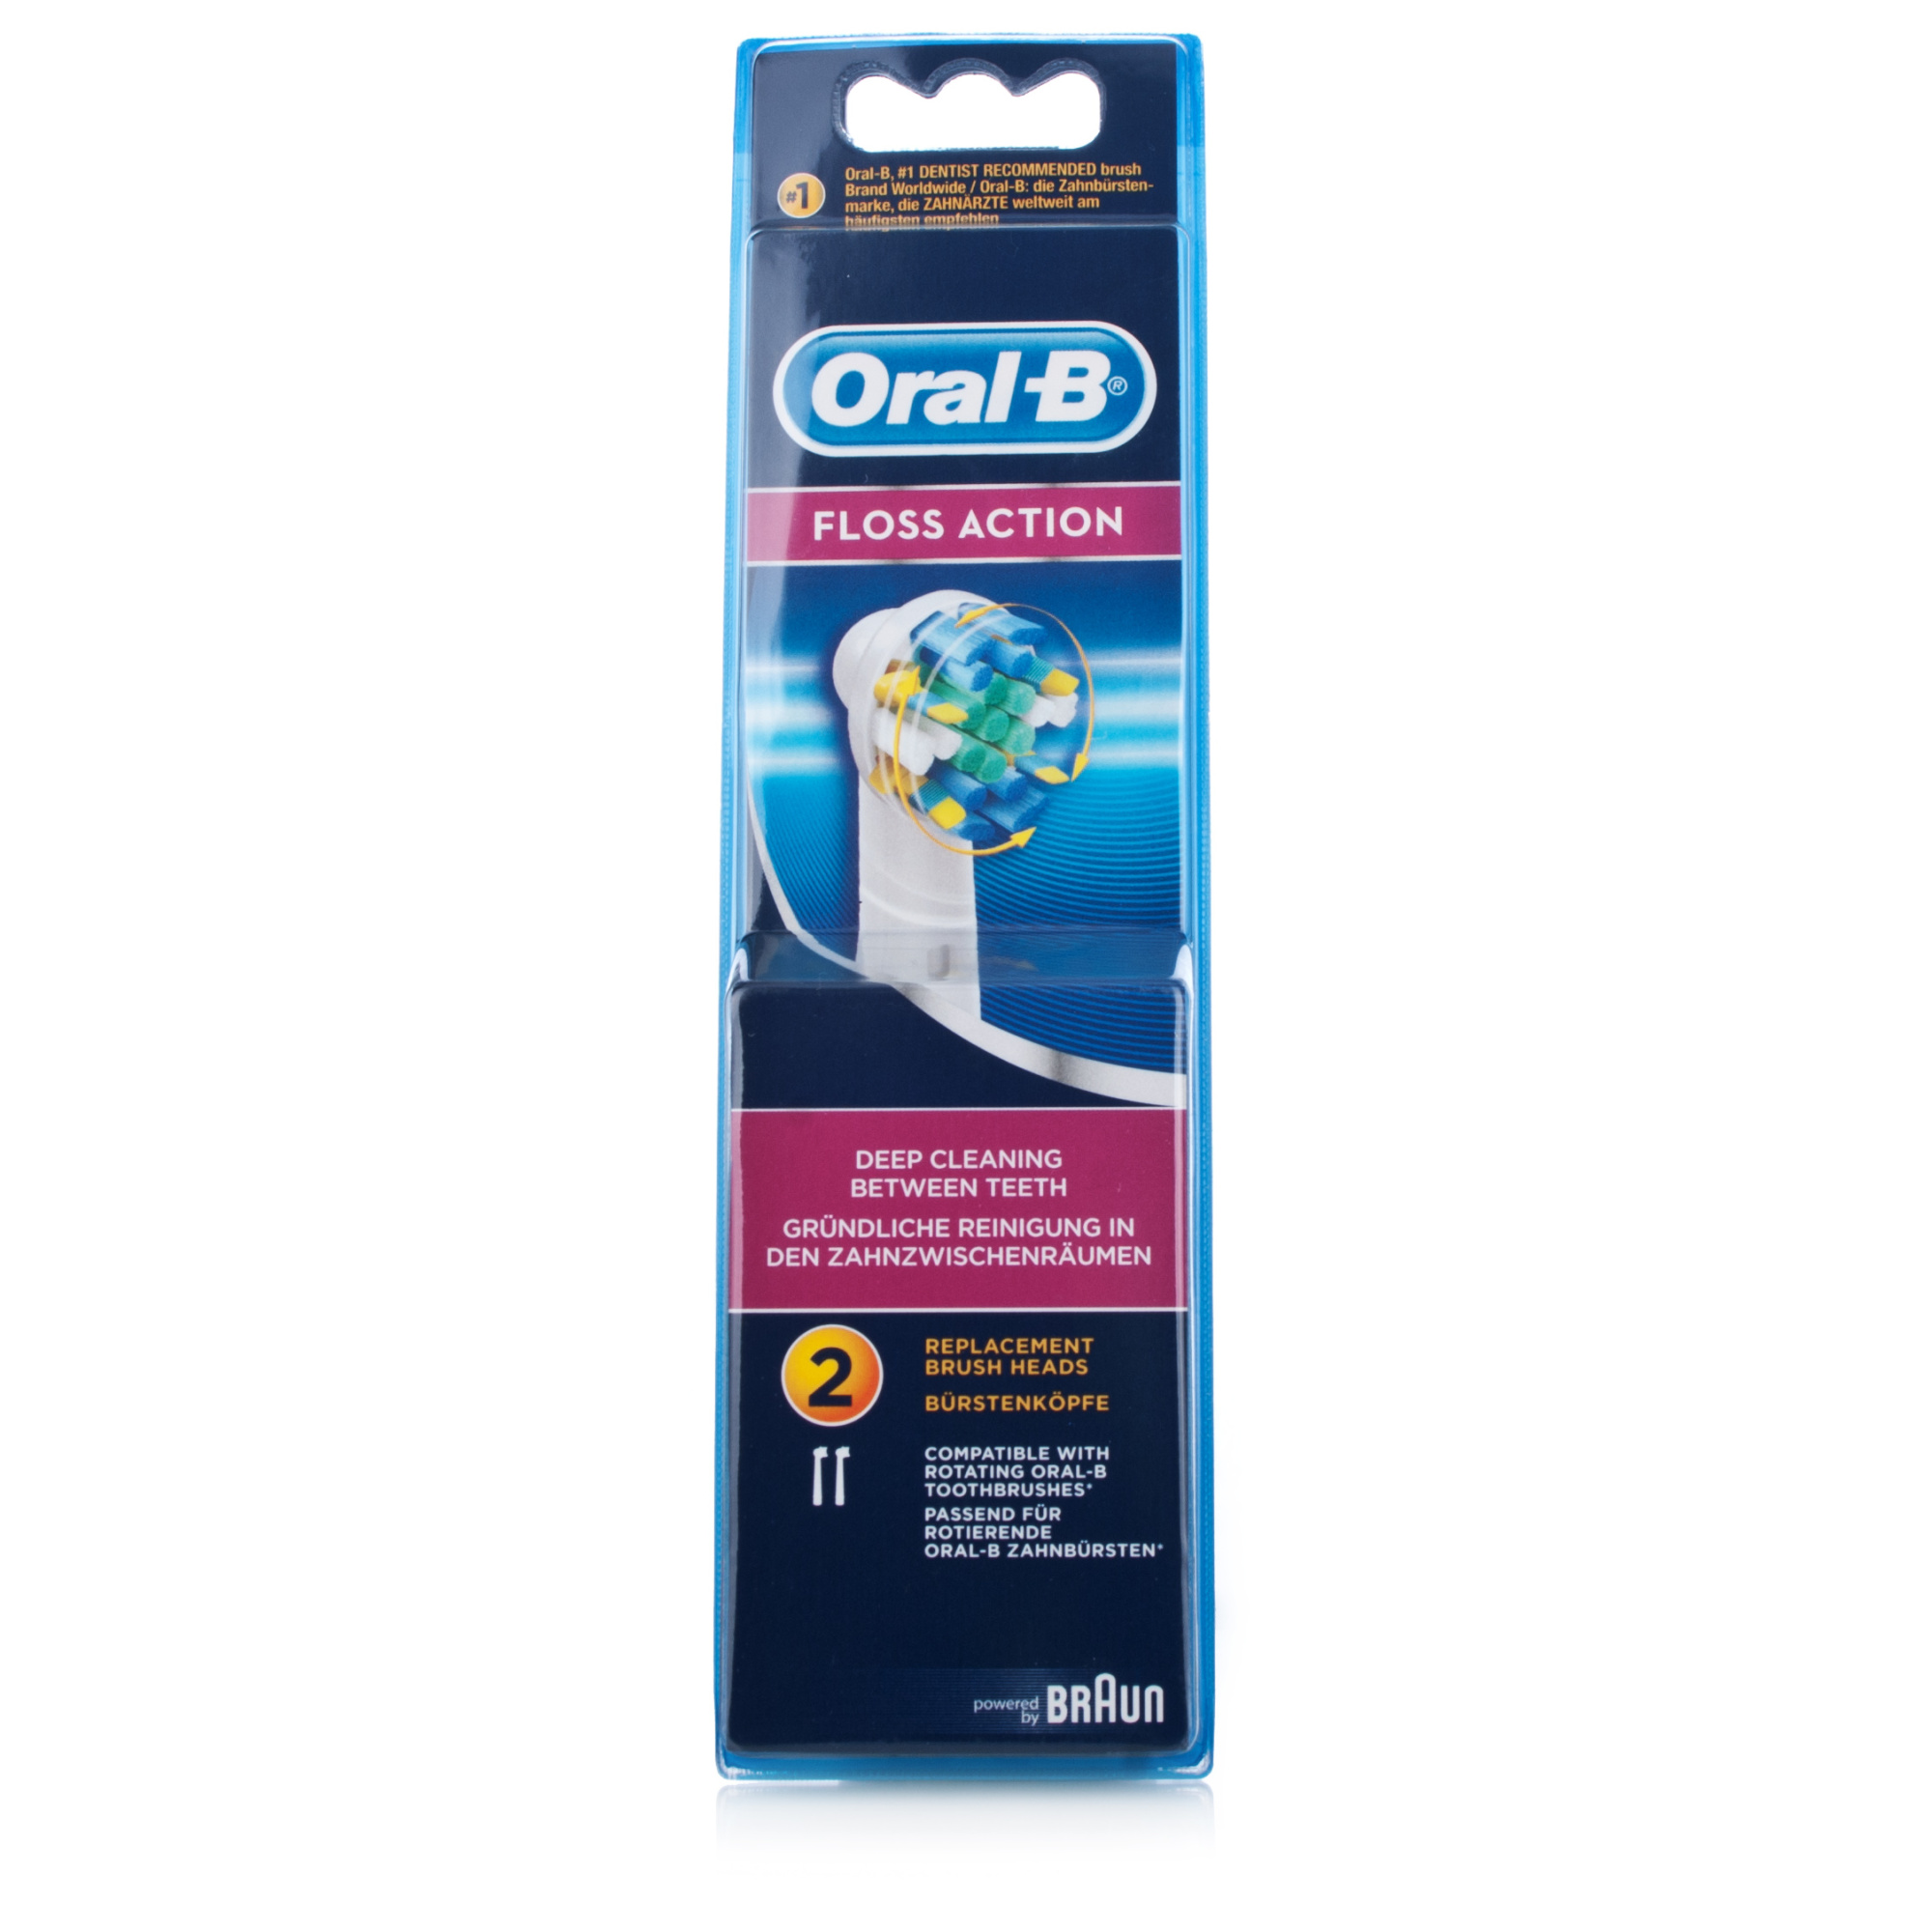 Oral B Floss Action Brush 116